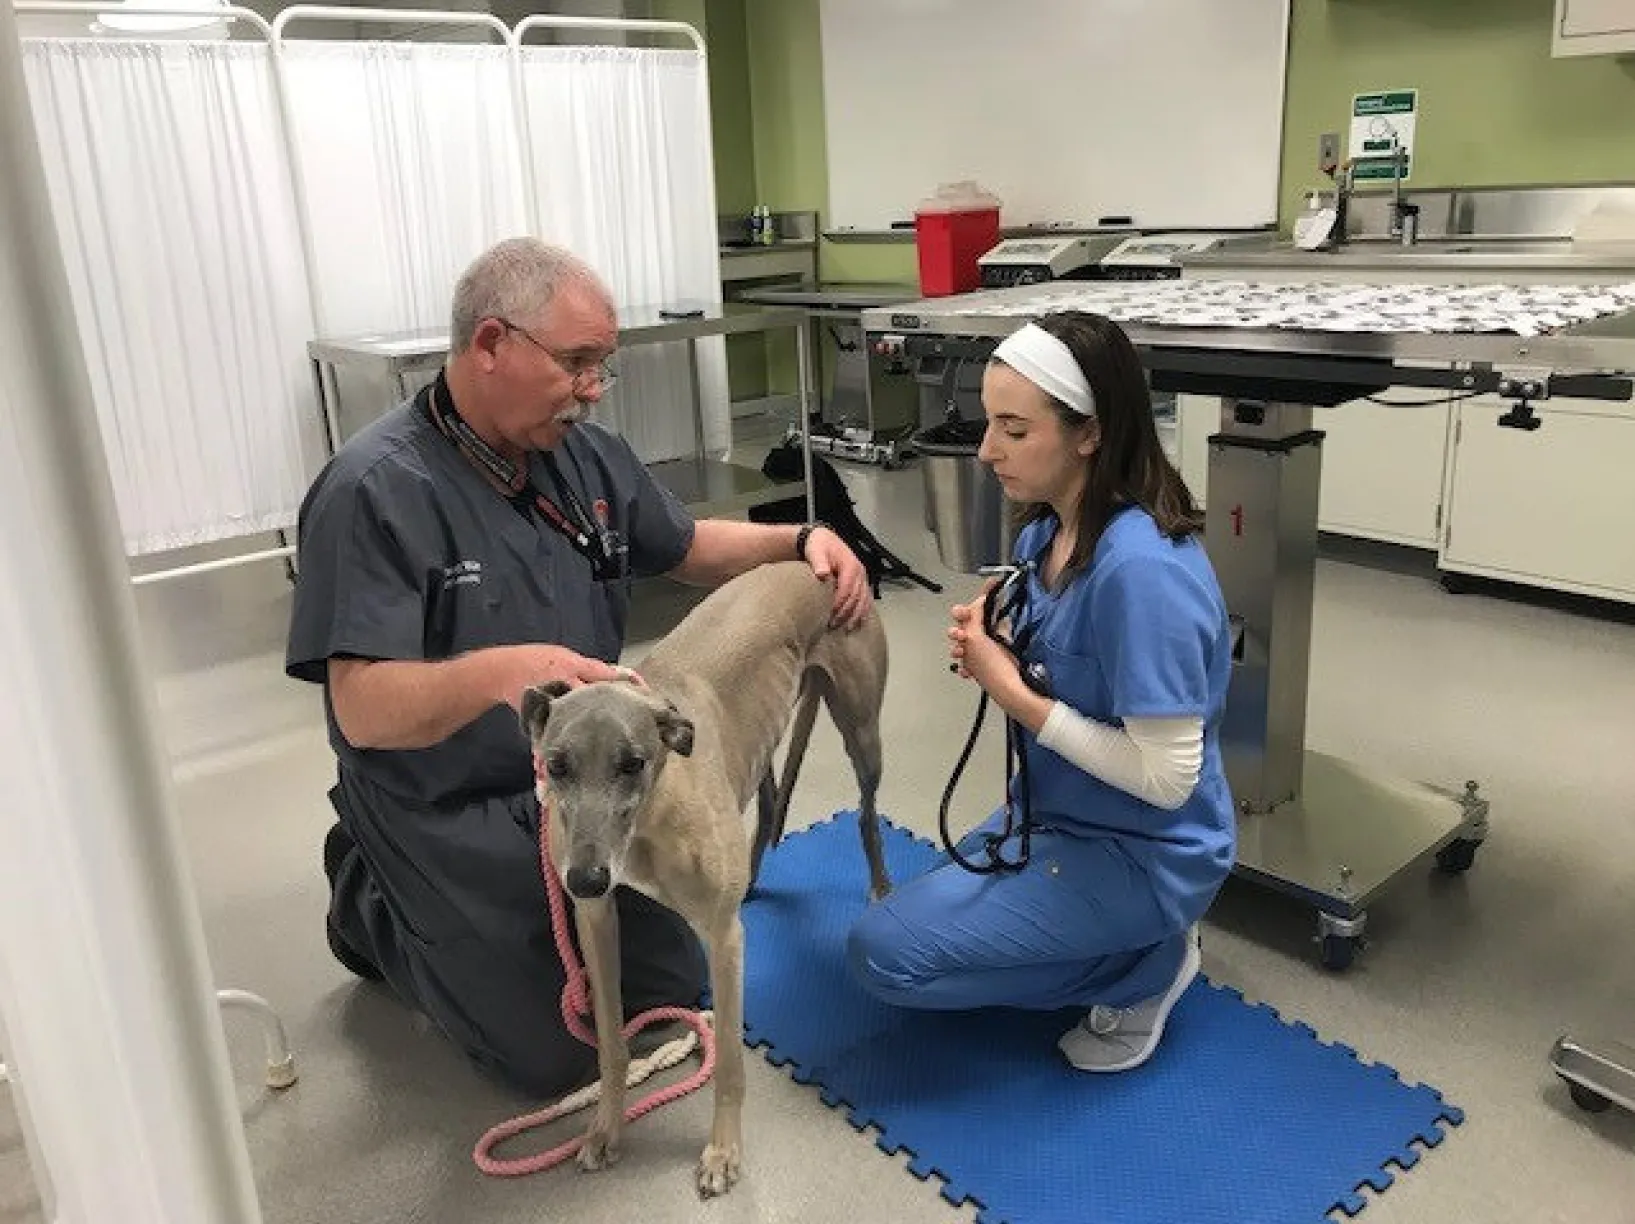 A vet and a vet student examining a dog